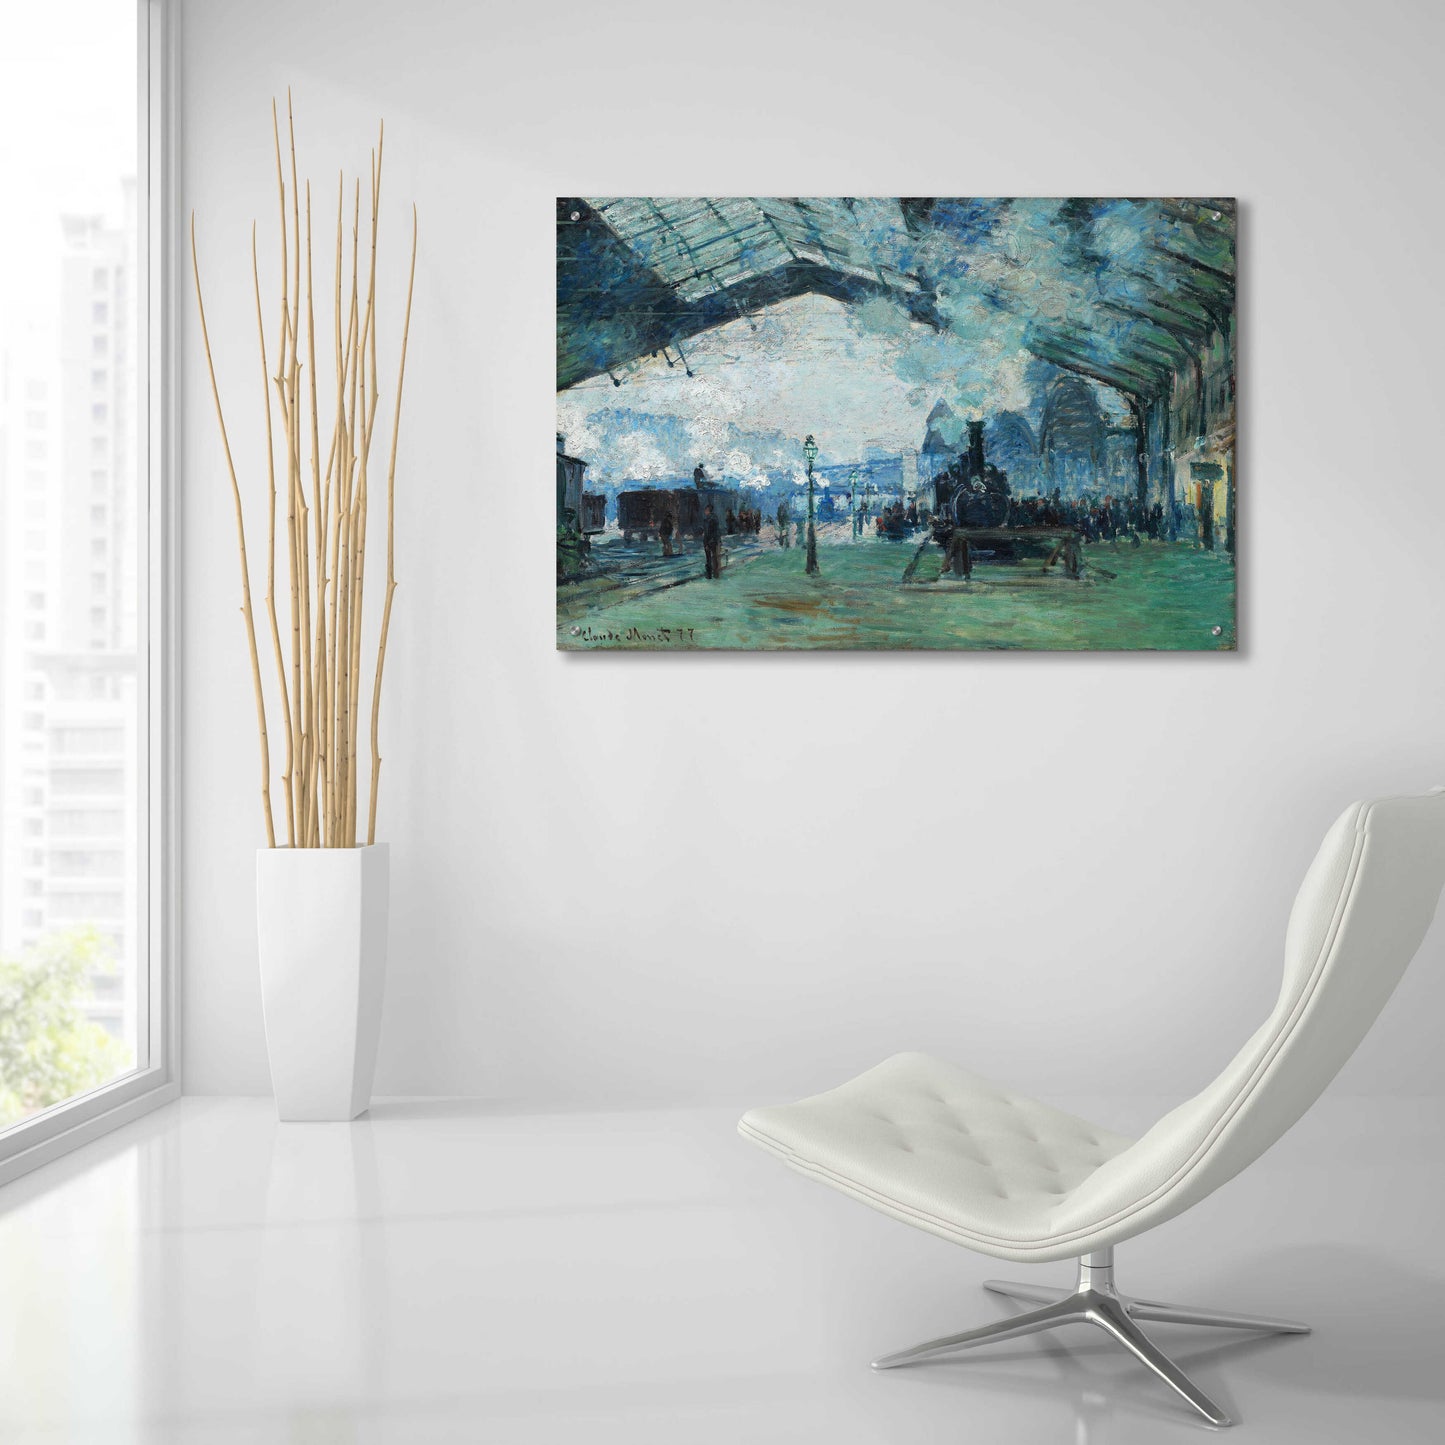 Epic Art 'Ariival Of The Normandy Train' by Claude Monet, Acrylic Glass Wall Art,36x24